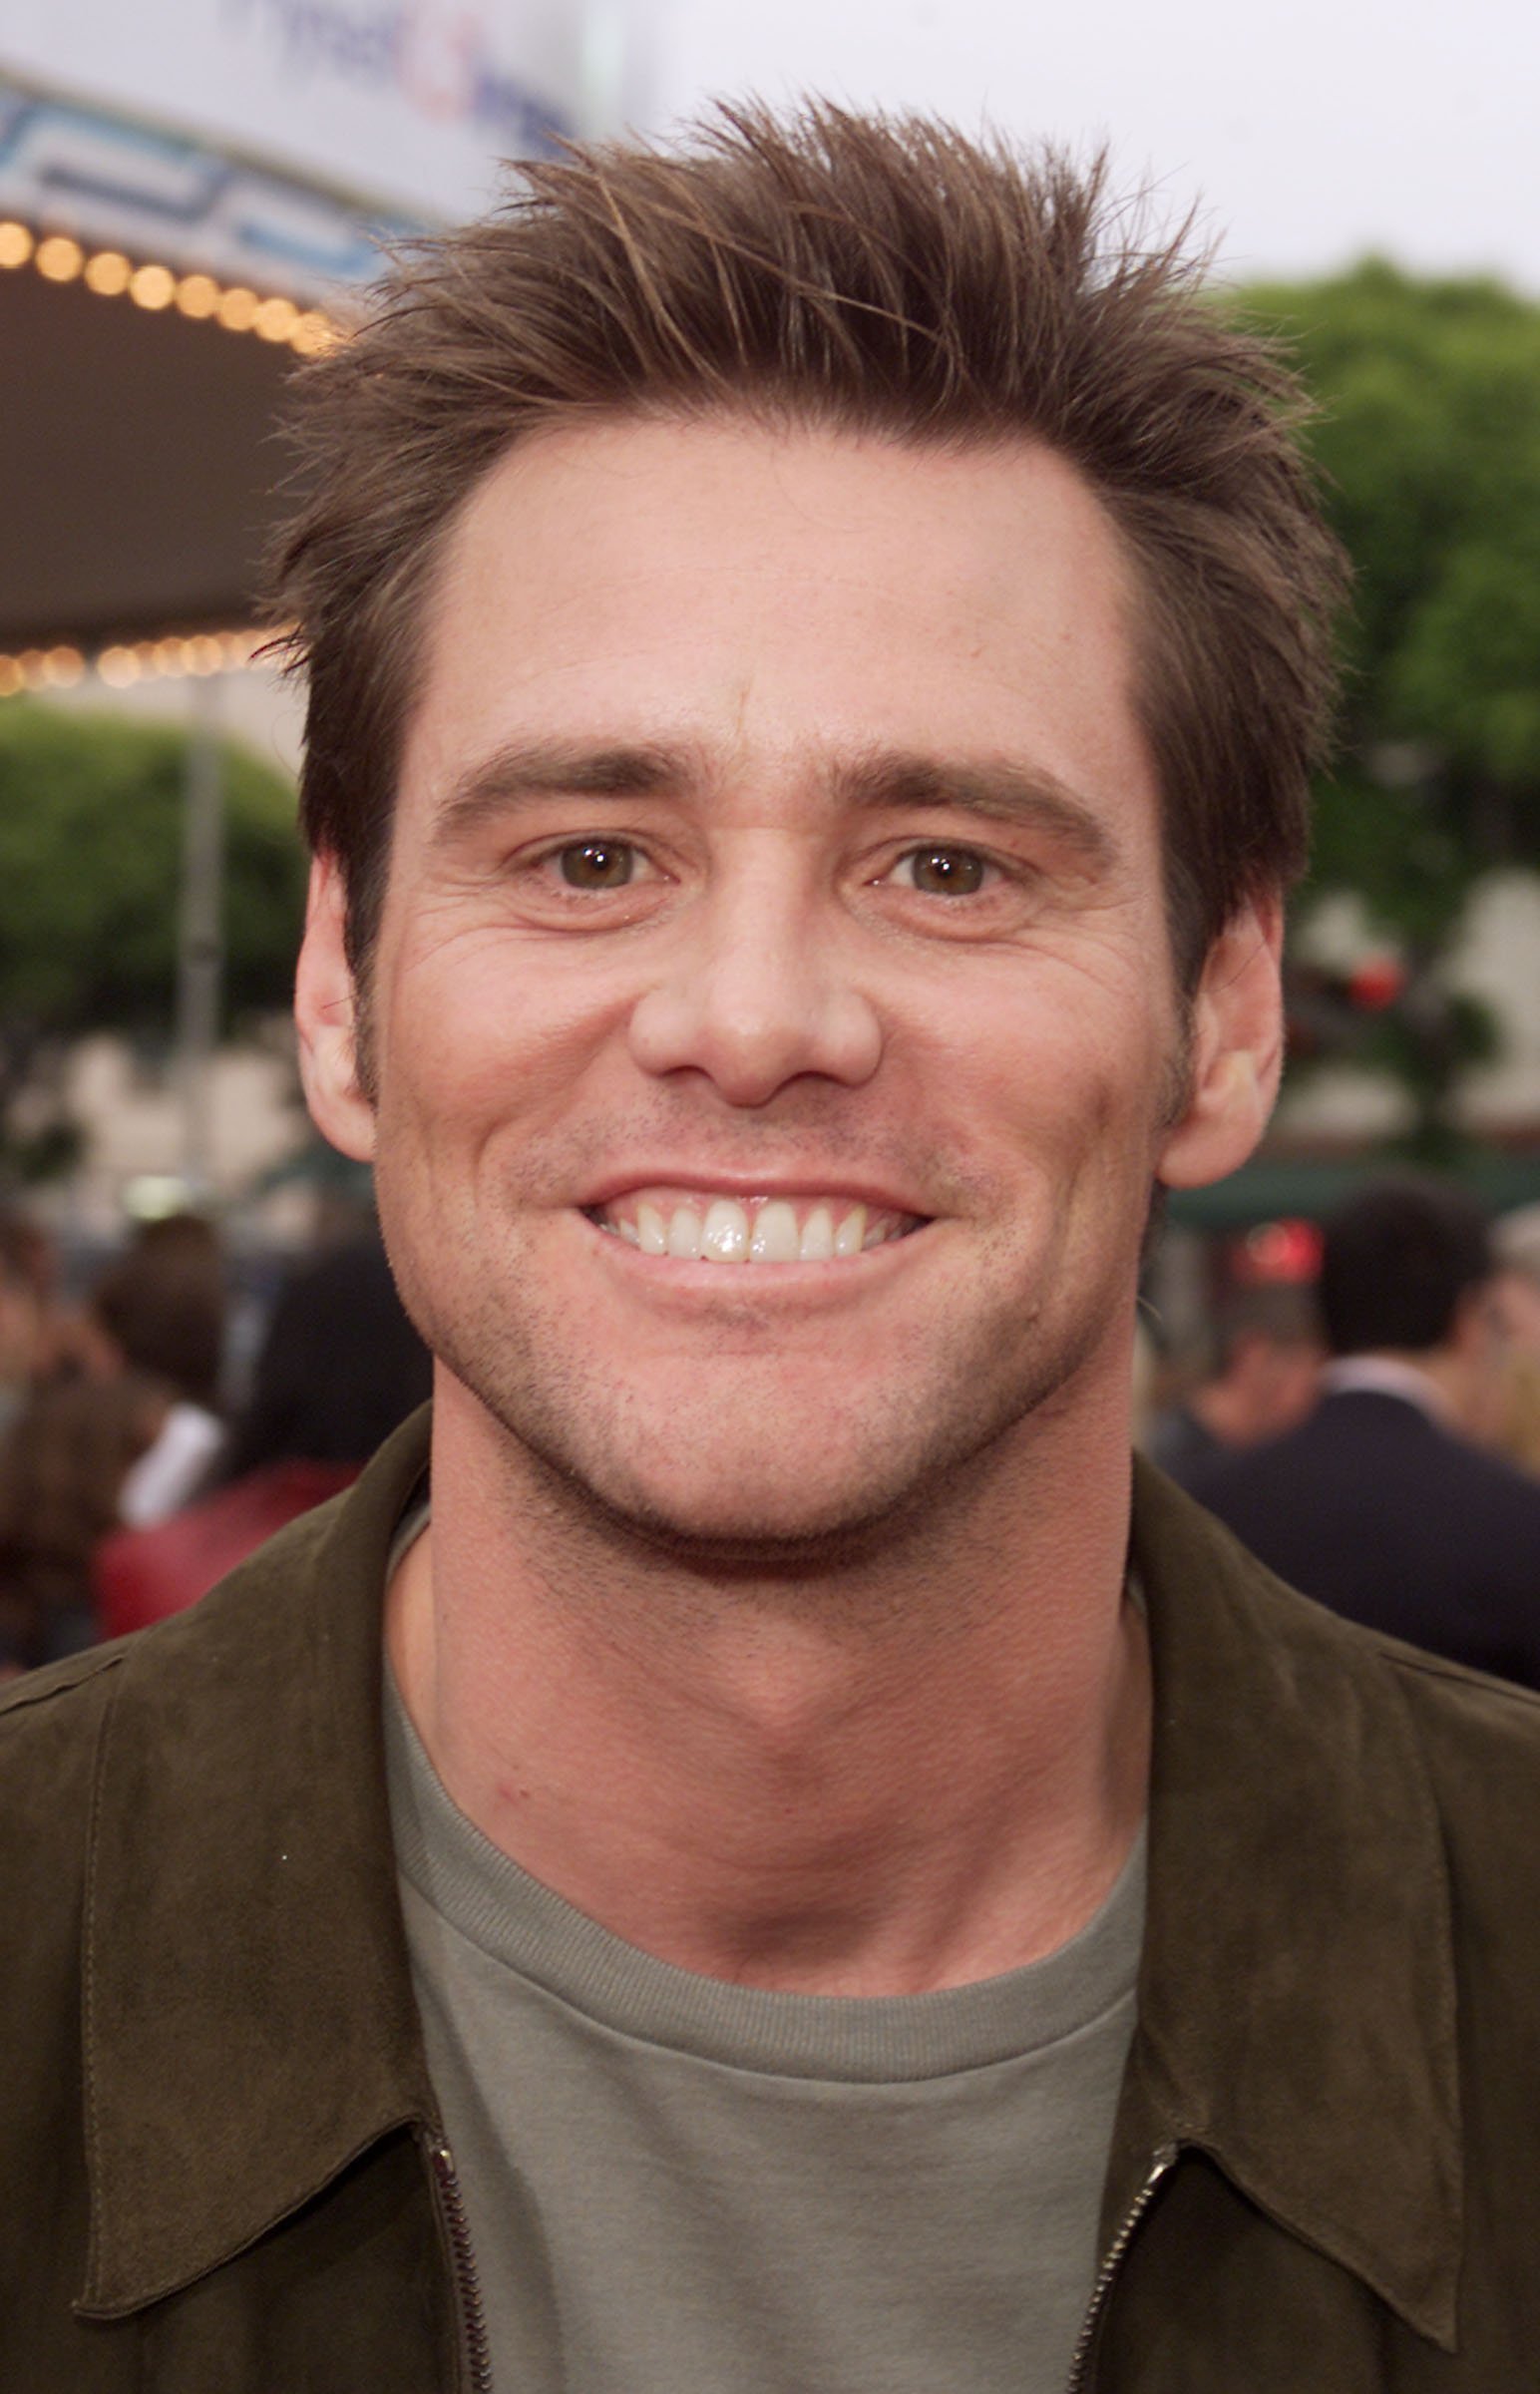 Jim Carrey in Westwood, California on June 15, 2000 | Photo: Getty Images